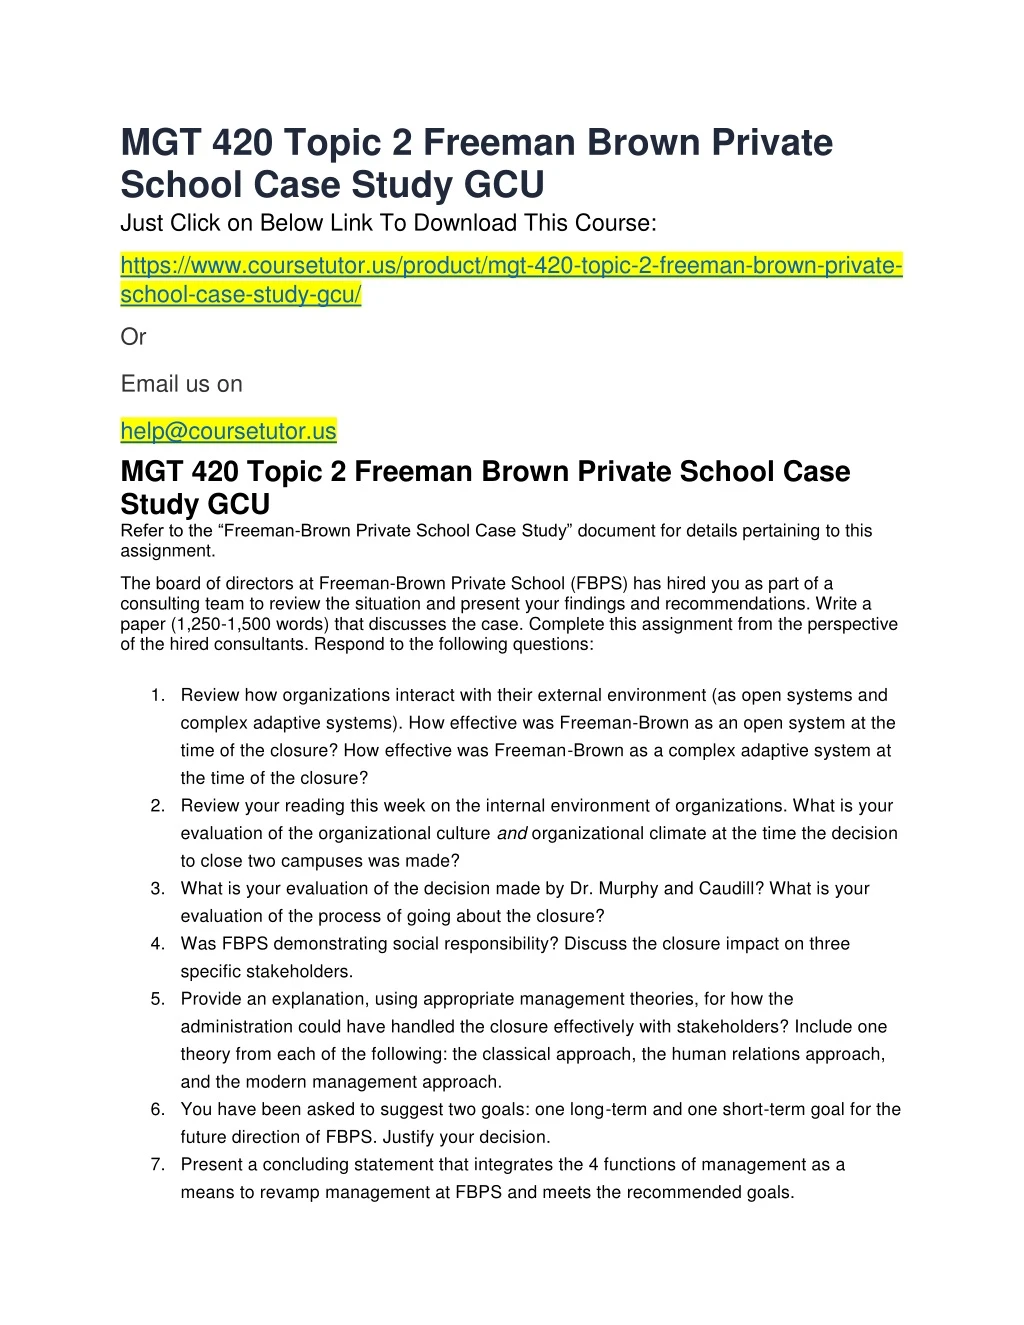 mgt 420 topic 2 freeman brown private school case